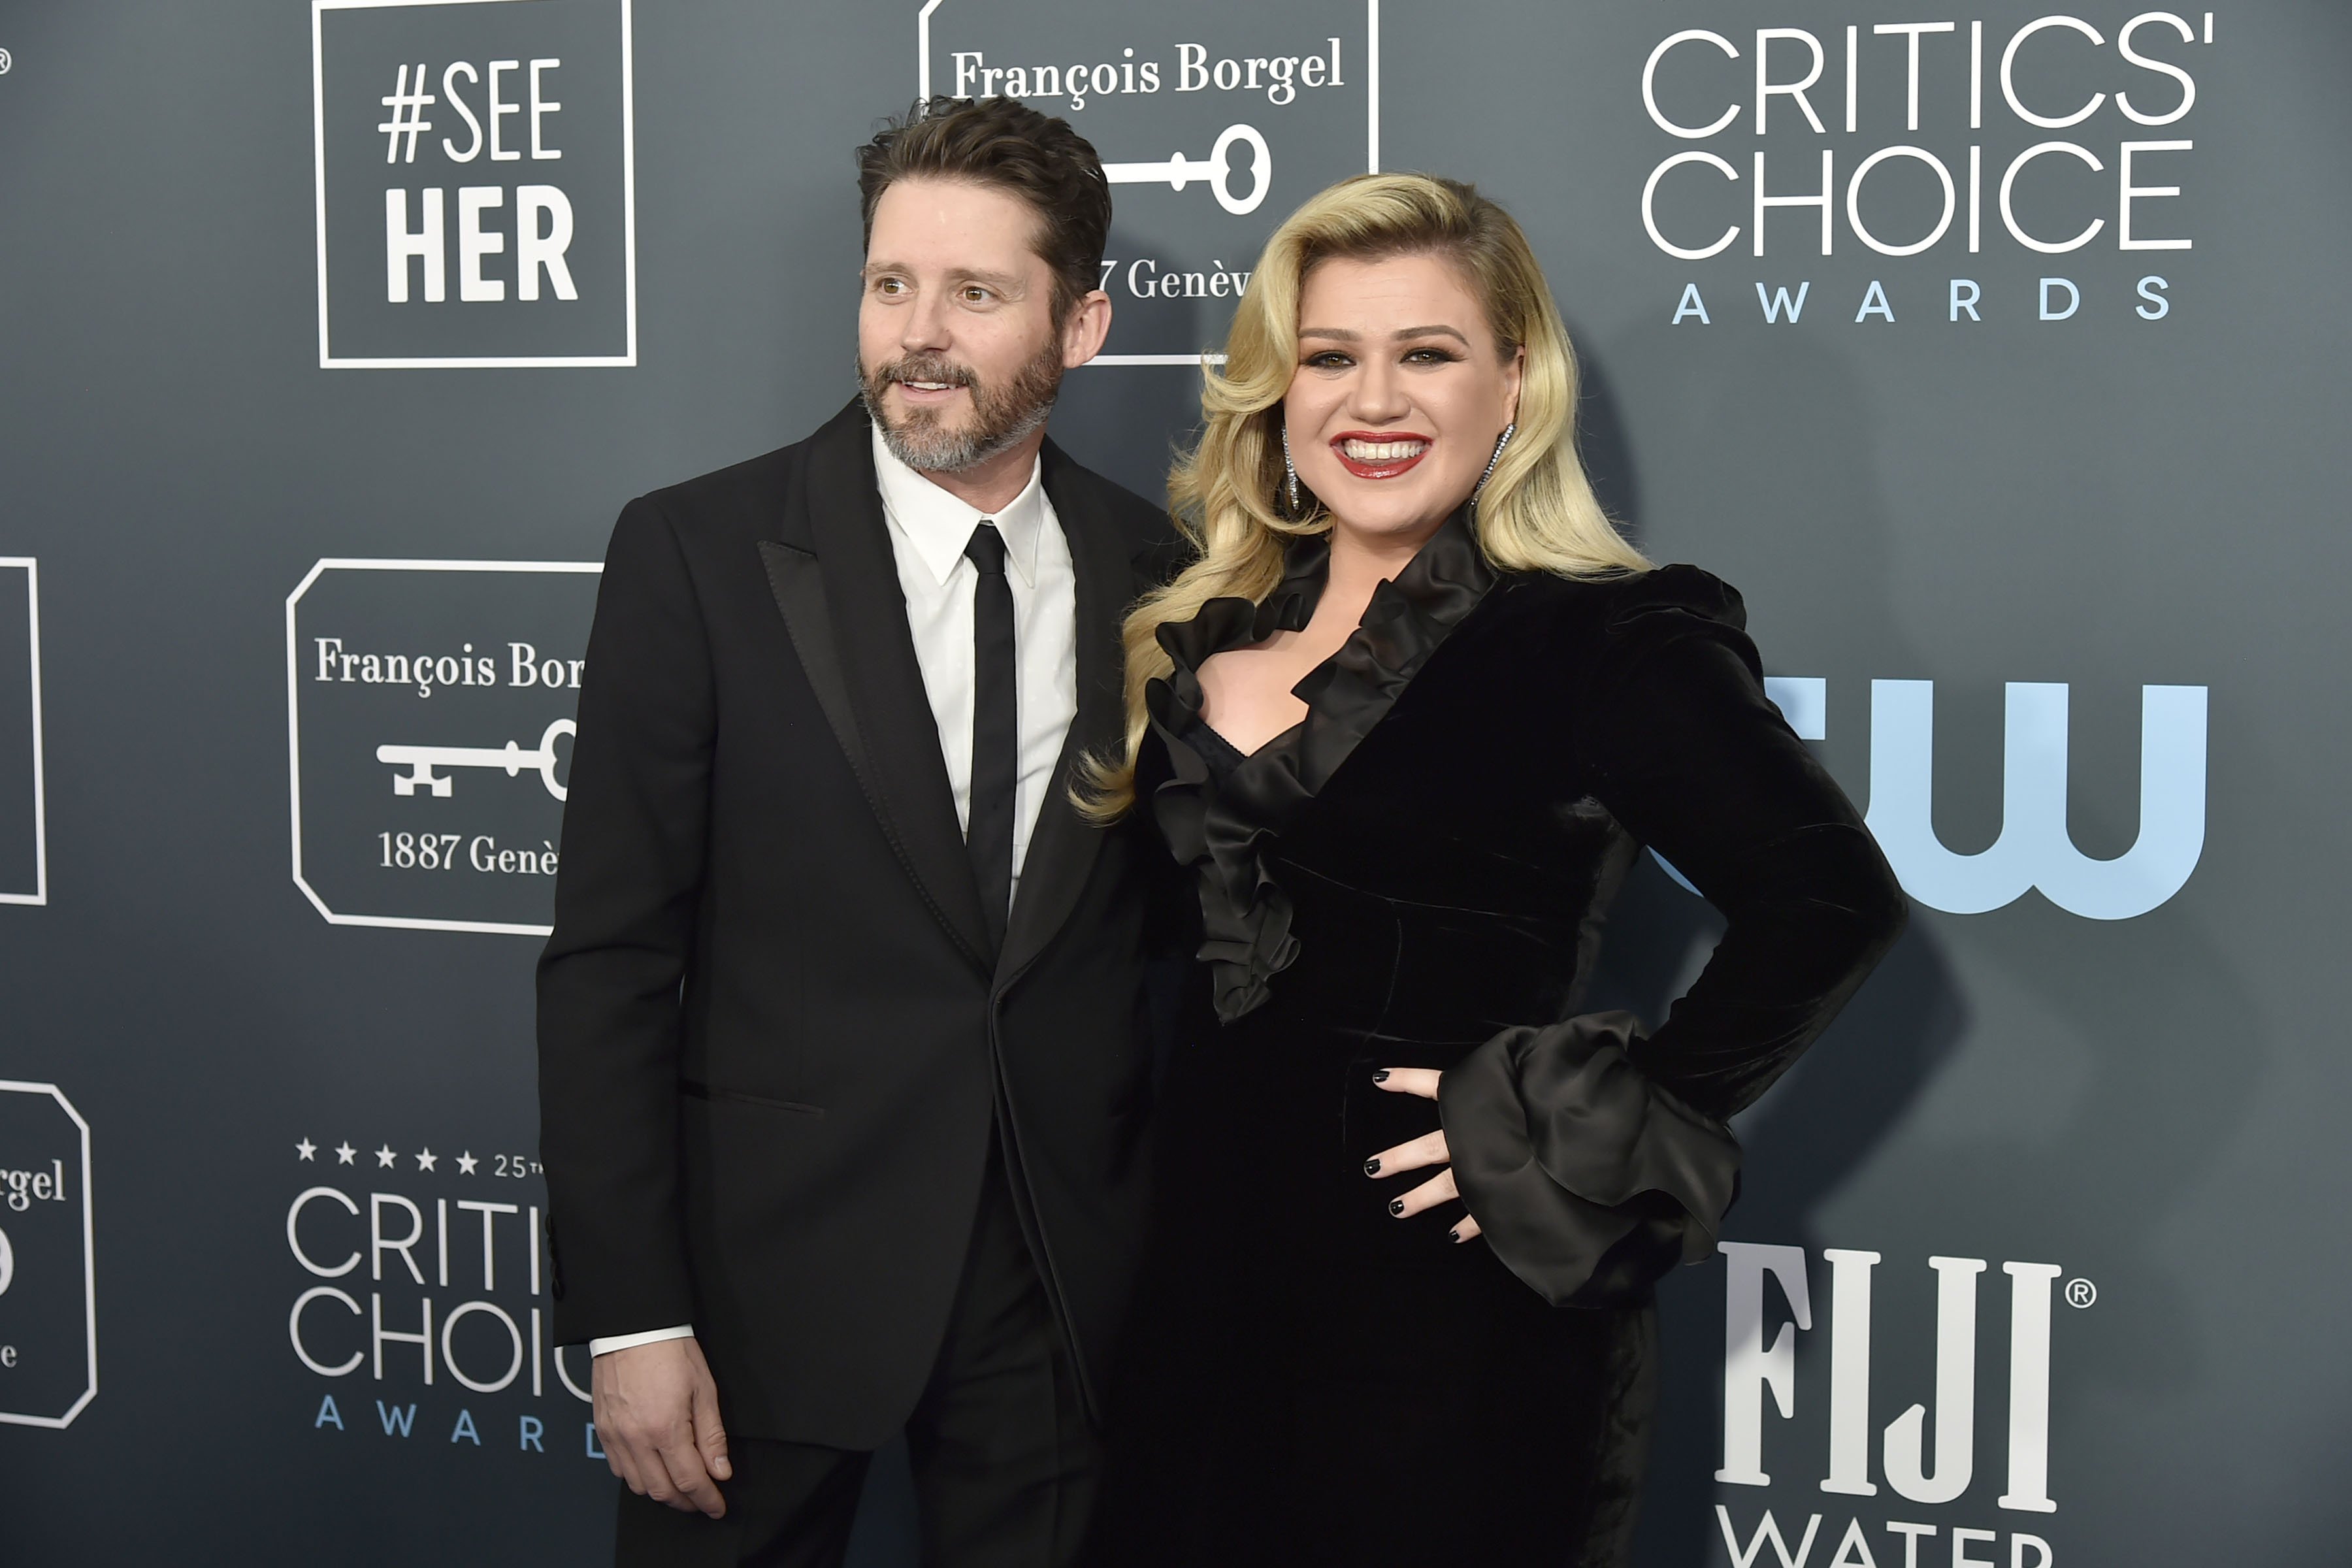  Brandon Blackstock and Kelly Clarkson during the arrivals for the 25th Annual Critics' Choice Awards at Barker Hangar on January 12, 2020 in Santa Monica, California | Source: Getty Images